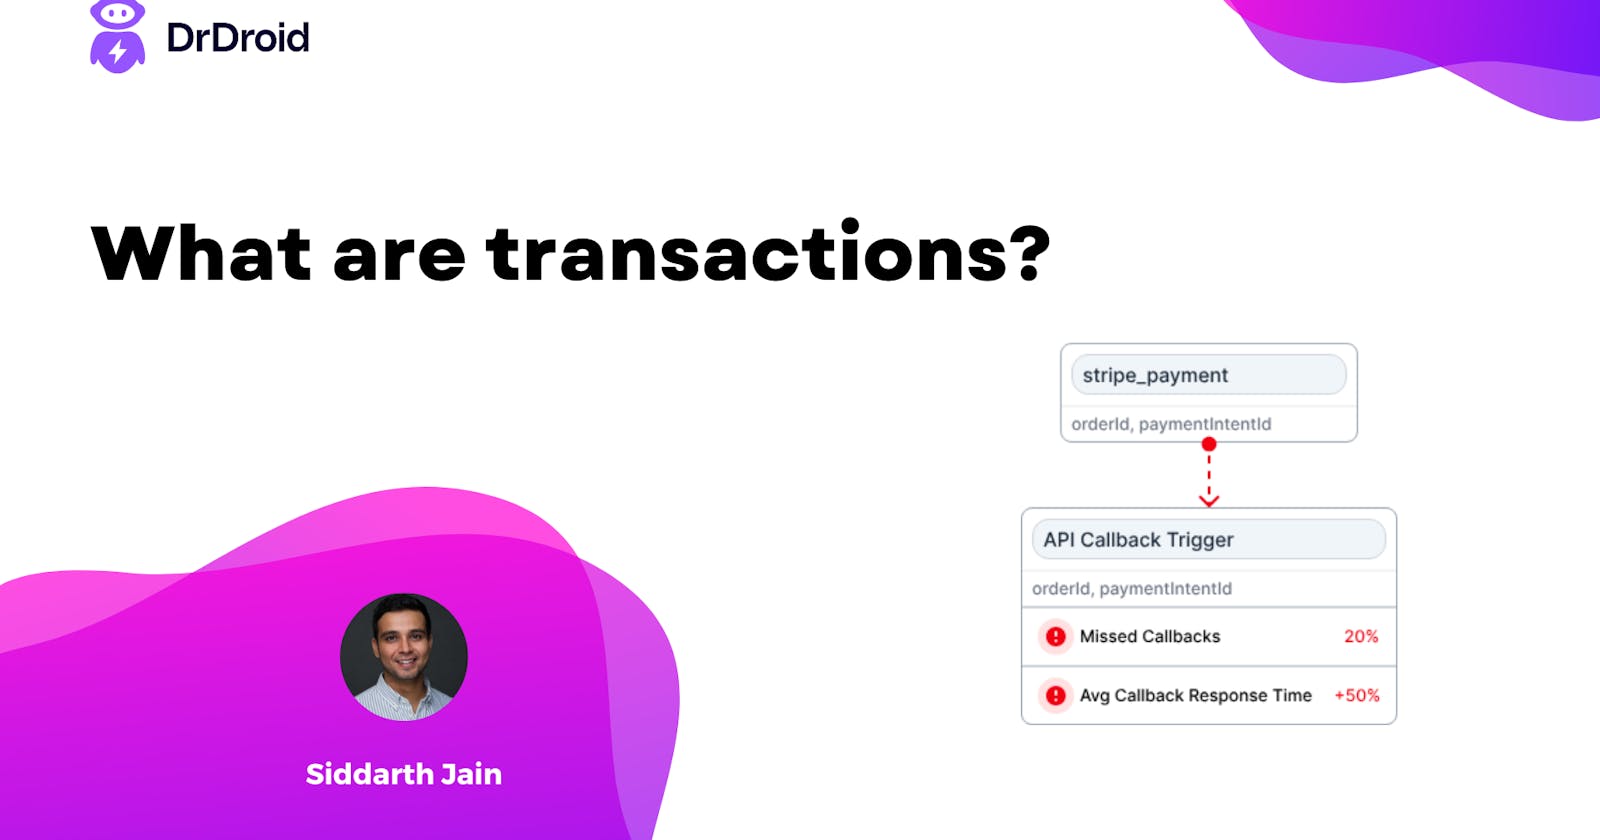 What are transactions on Dr. Droid?